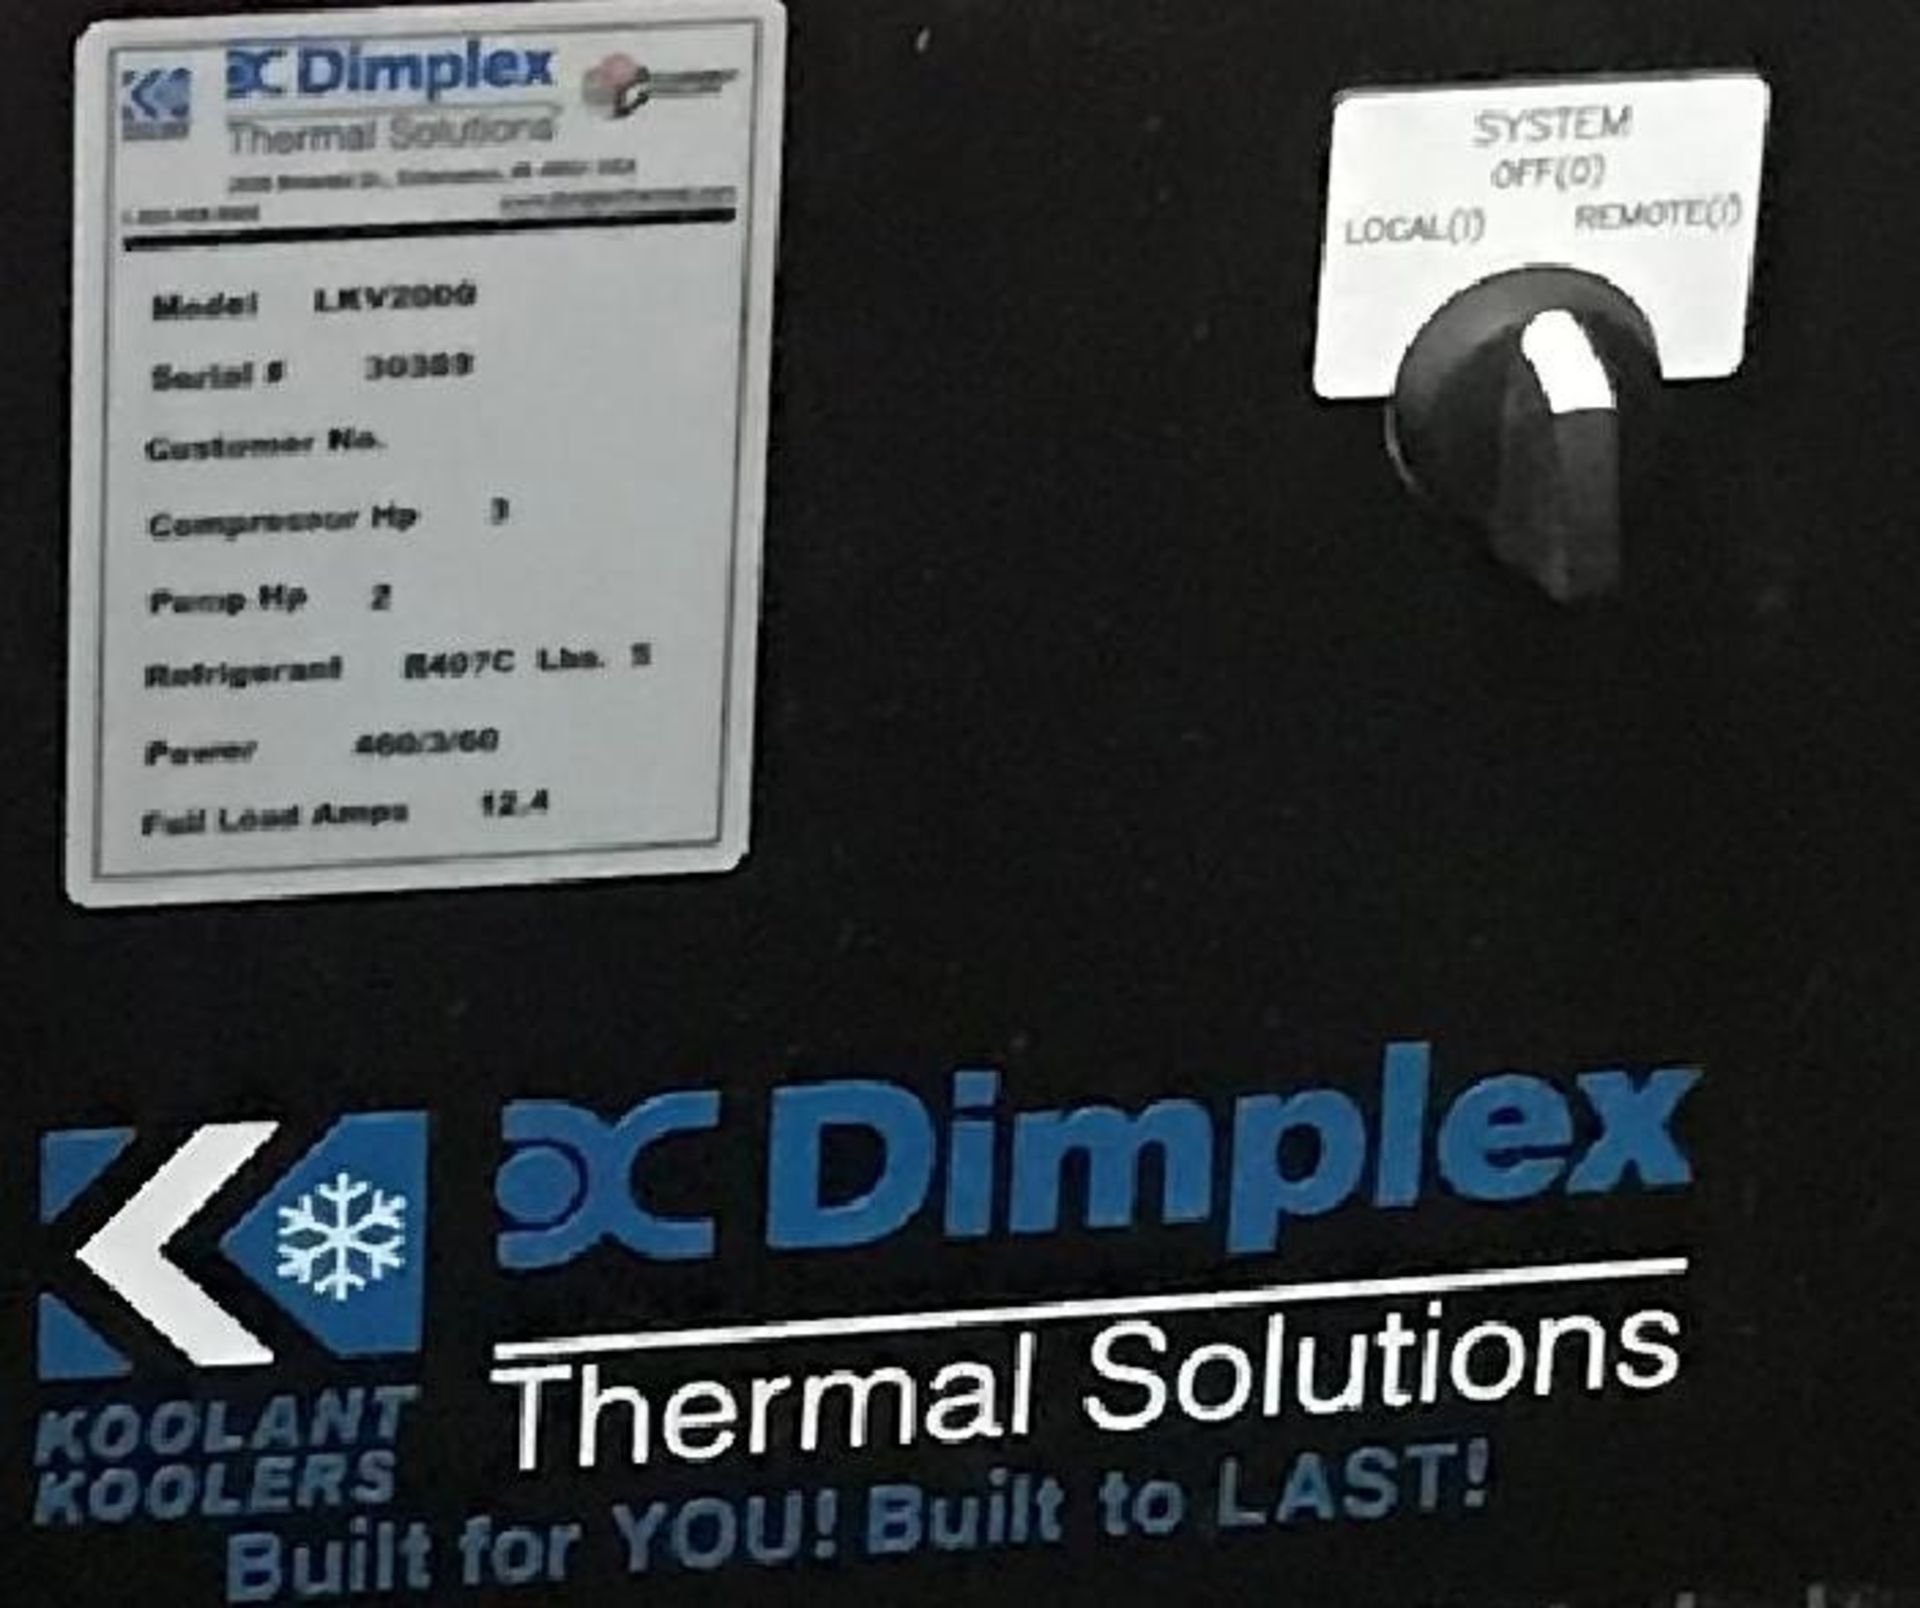 DC Dimplex Thermal Solutions Chiller. Model: LKV2000, Serial: 30389, 460 Volt, 12.4 Amps. Machine is - Image 2 of 2